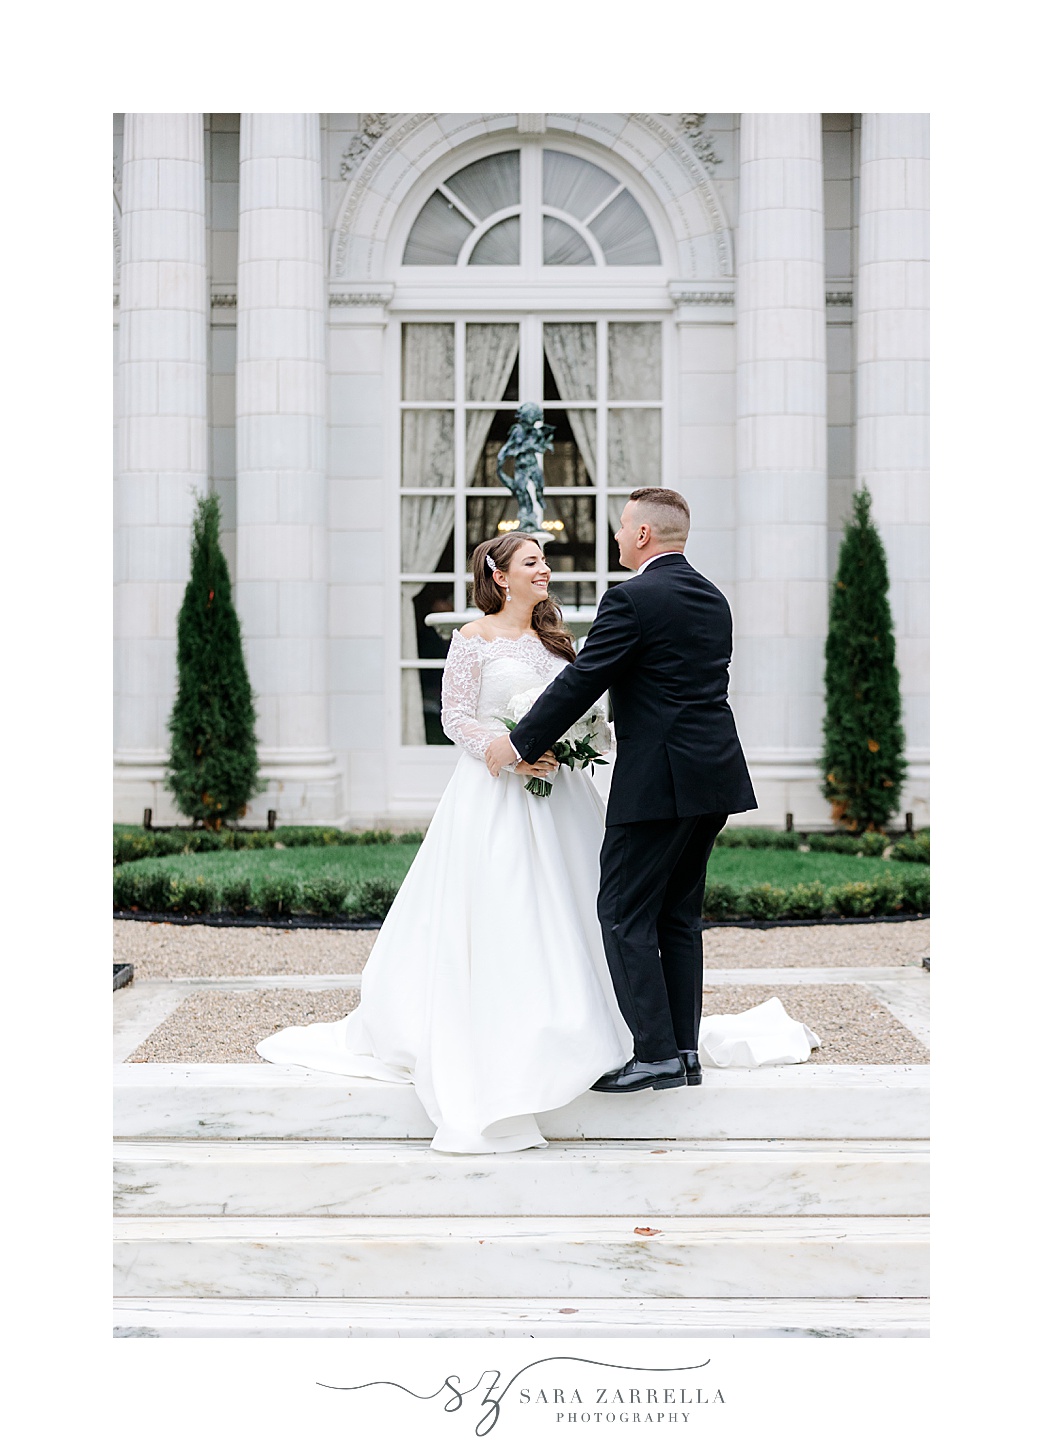 bride and groom twirl outside large window at Rosecliff Mansion